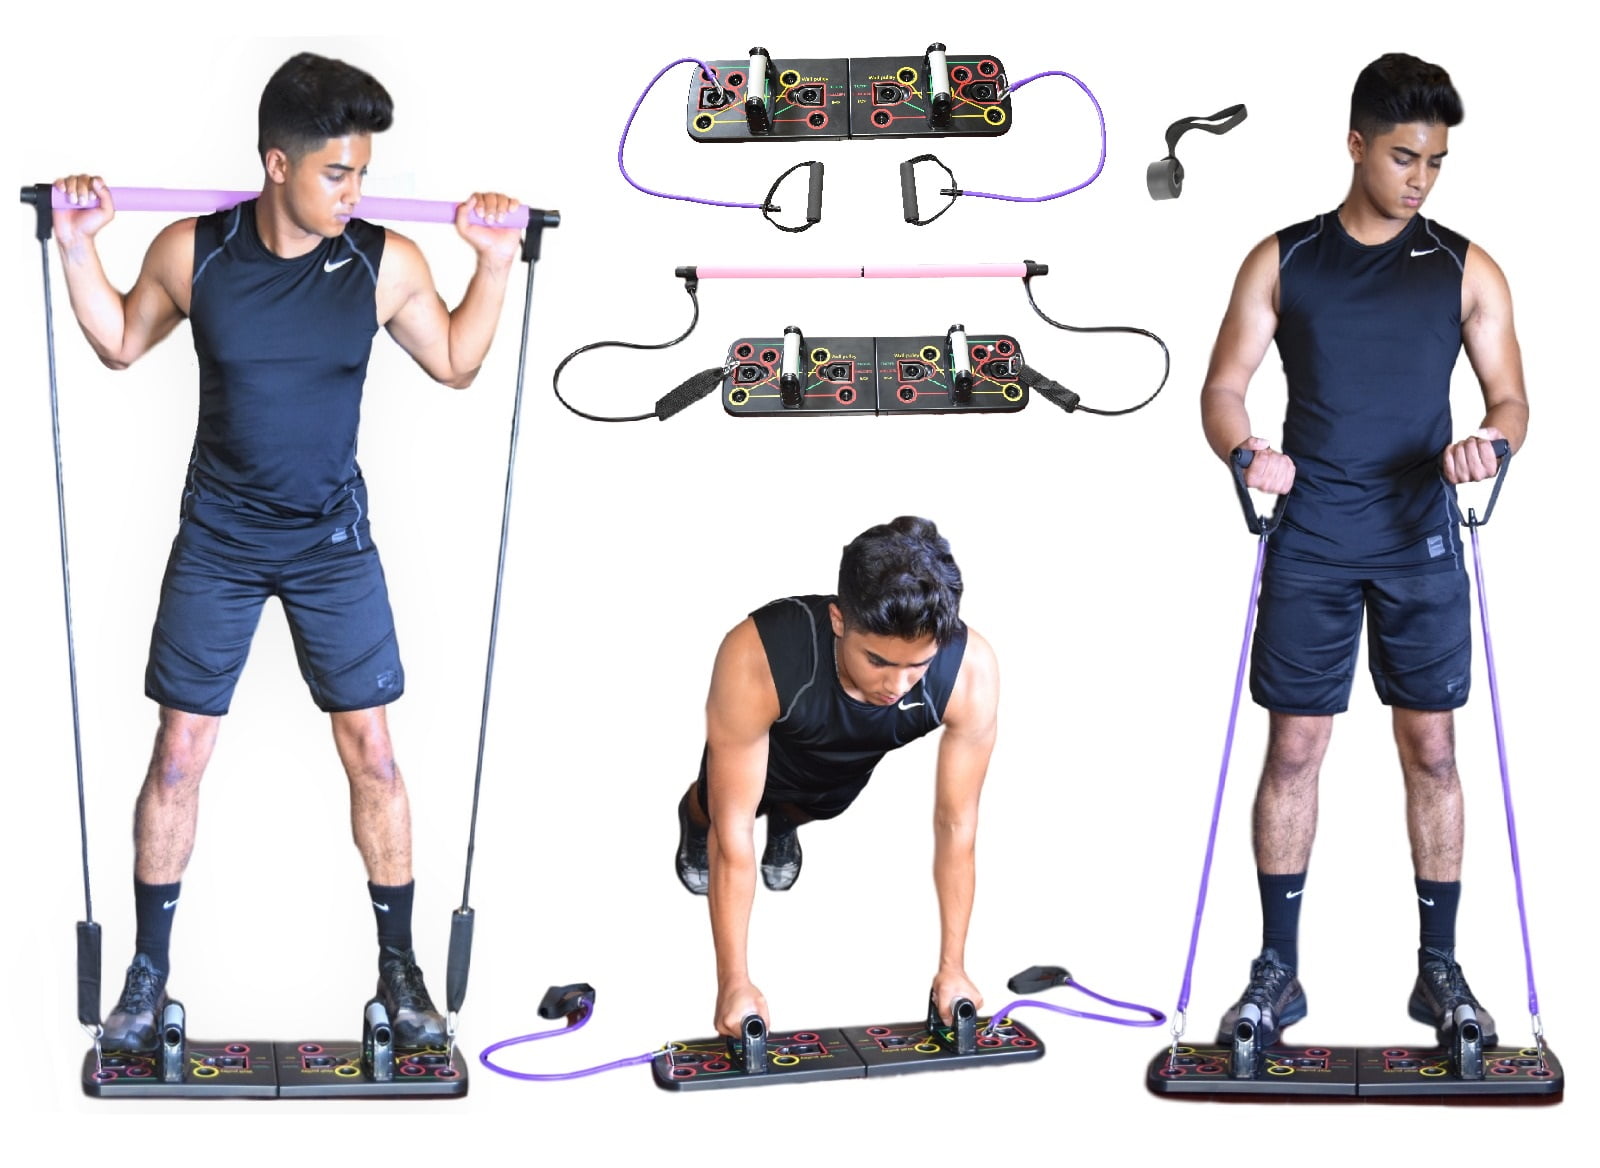 Portable Full Body Workout kit: Exercise bar 3 Non-Slip Adjustable Hip Bands 2 Ankle Strap 2 Handles 2 Door Anchors 7 Stackable Bands for up to 190lbs Resistance 2 Core Disc MONLO GYM IN A BAG 